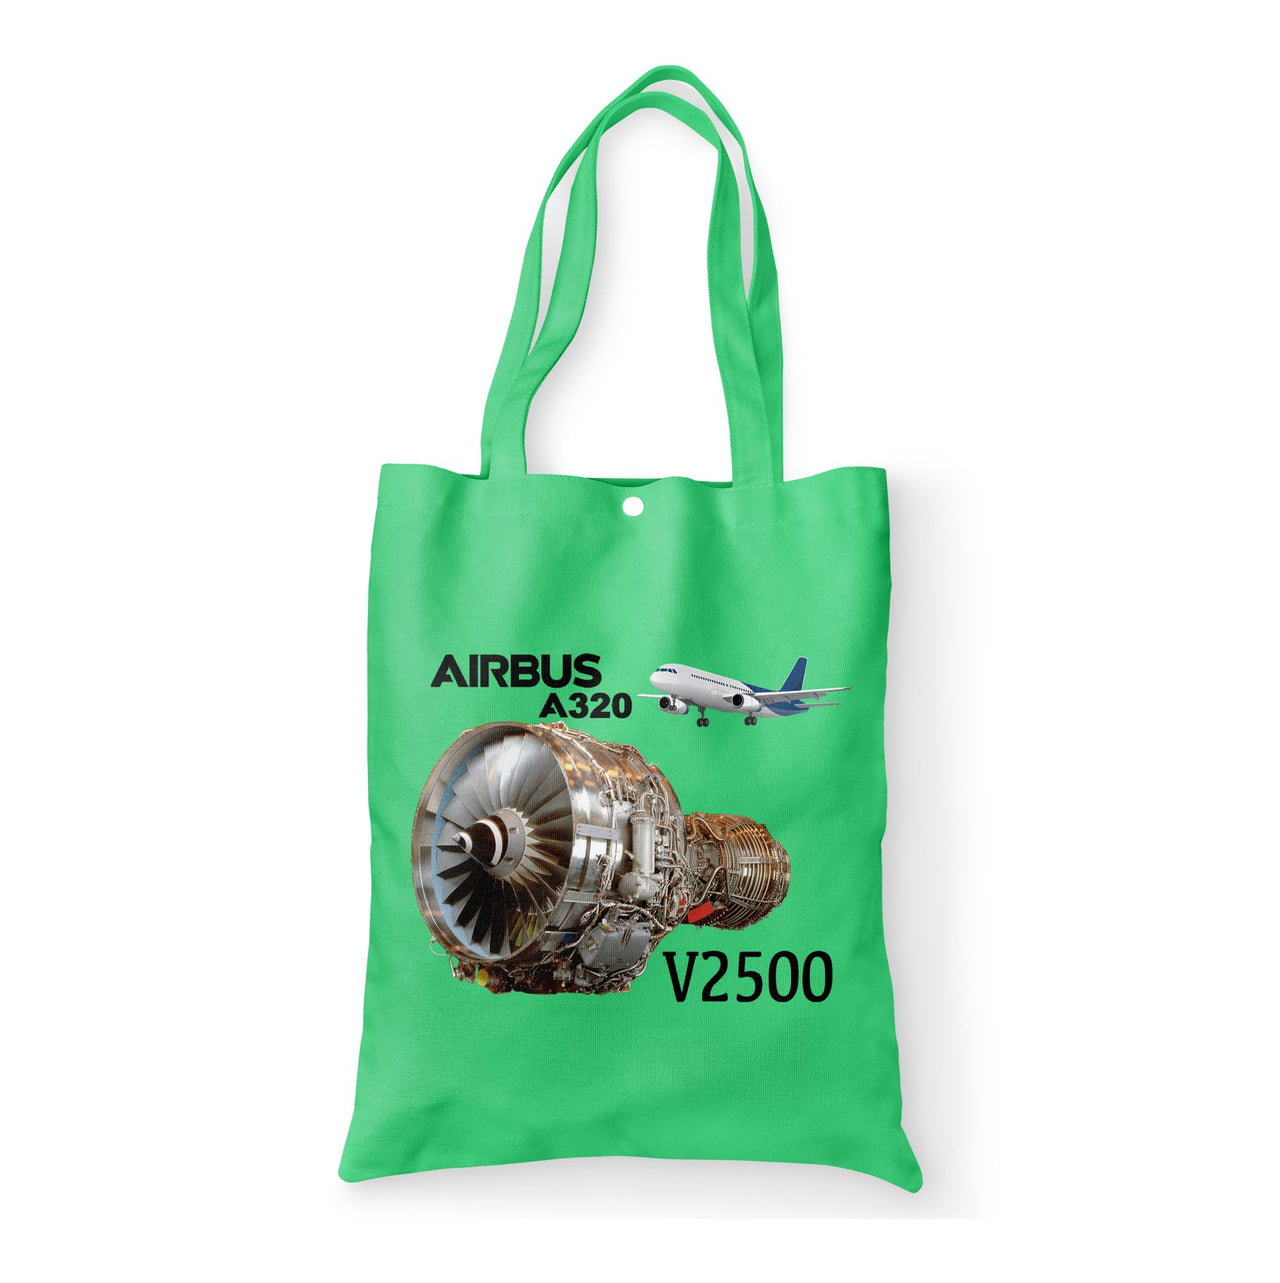 Airbus A320 & V2500 Engine Designed Tote Bags